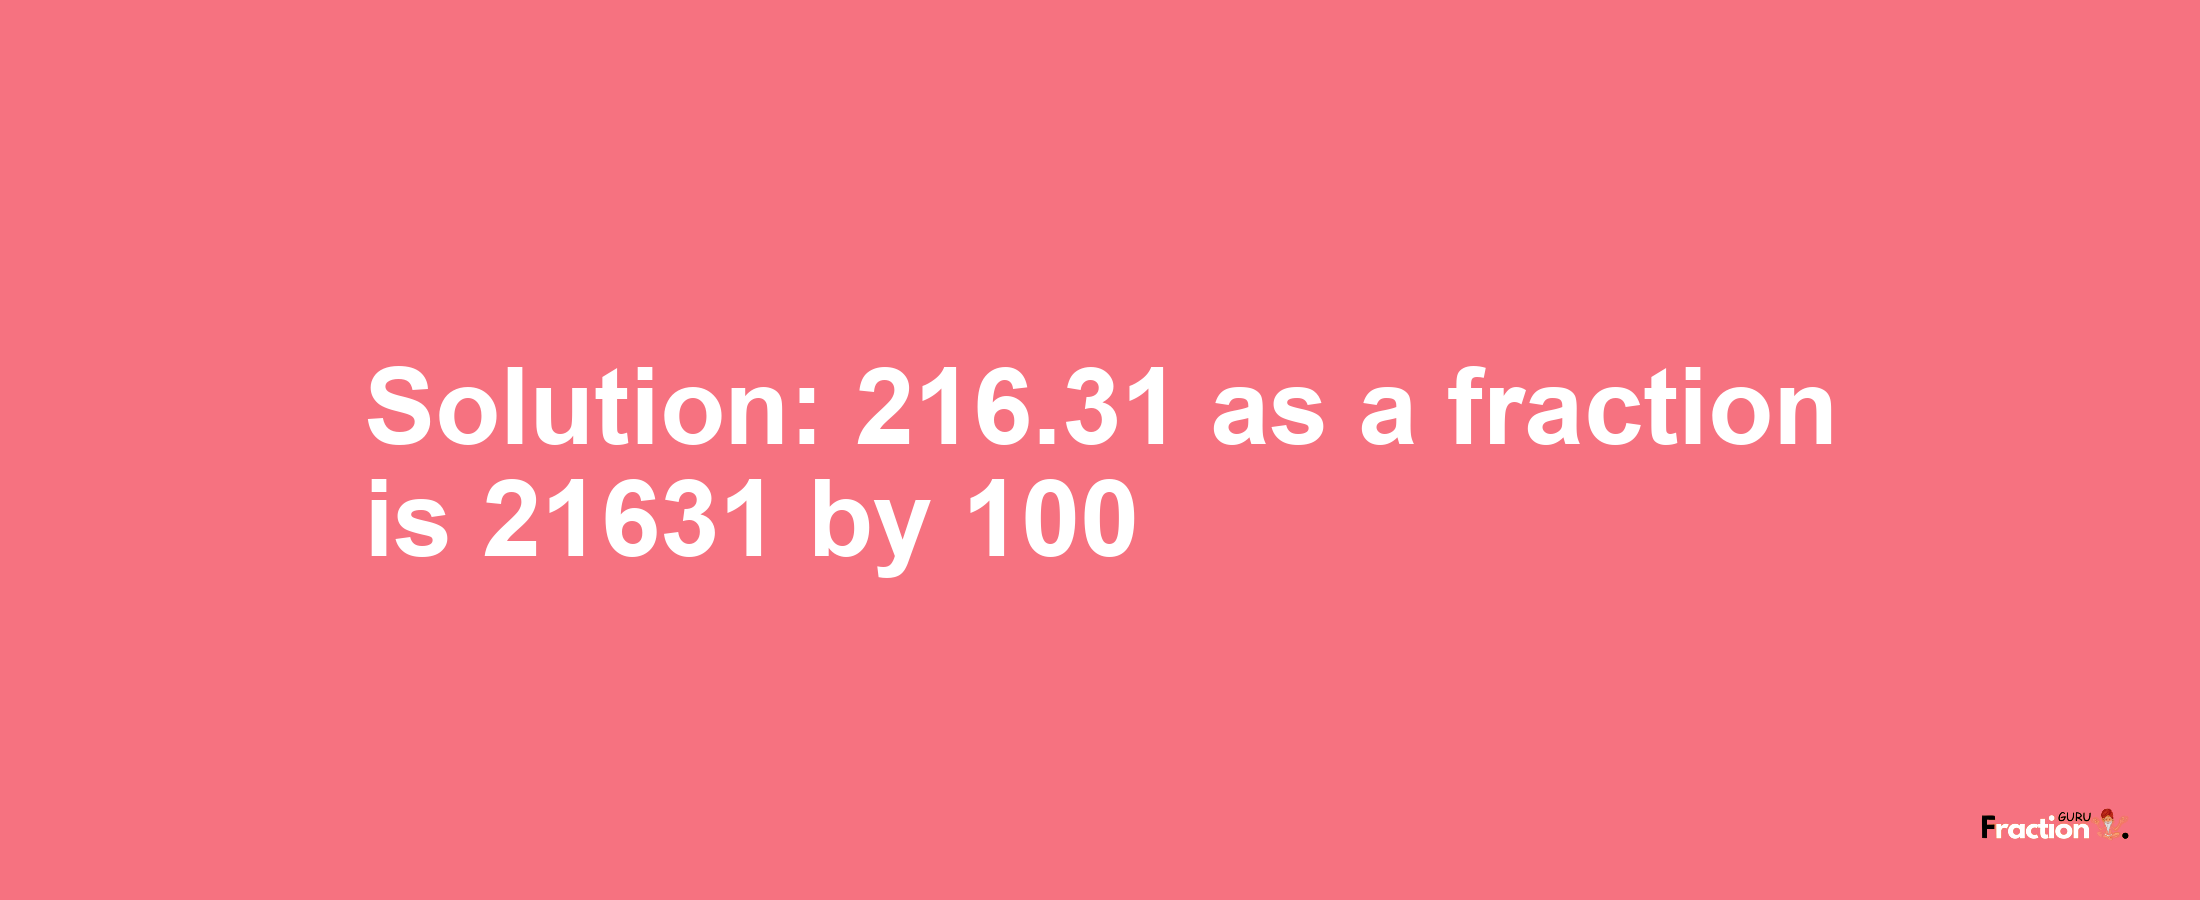 Solution:216.31 as a fraction is 21631/100